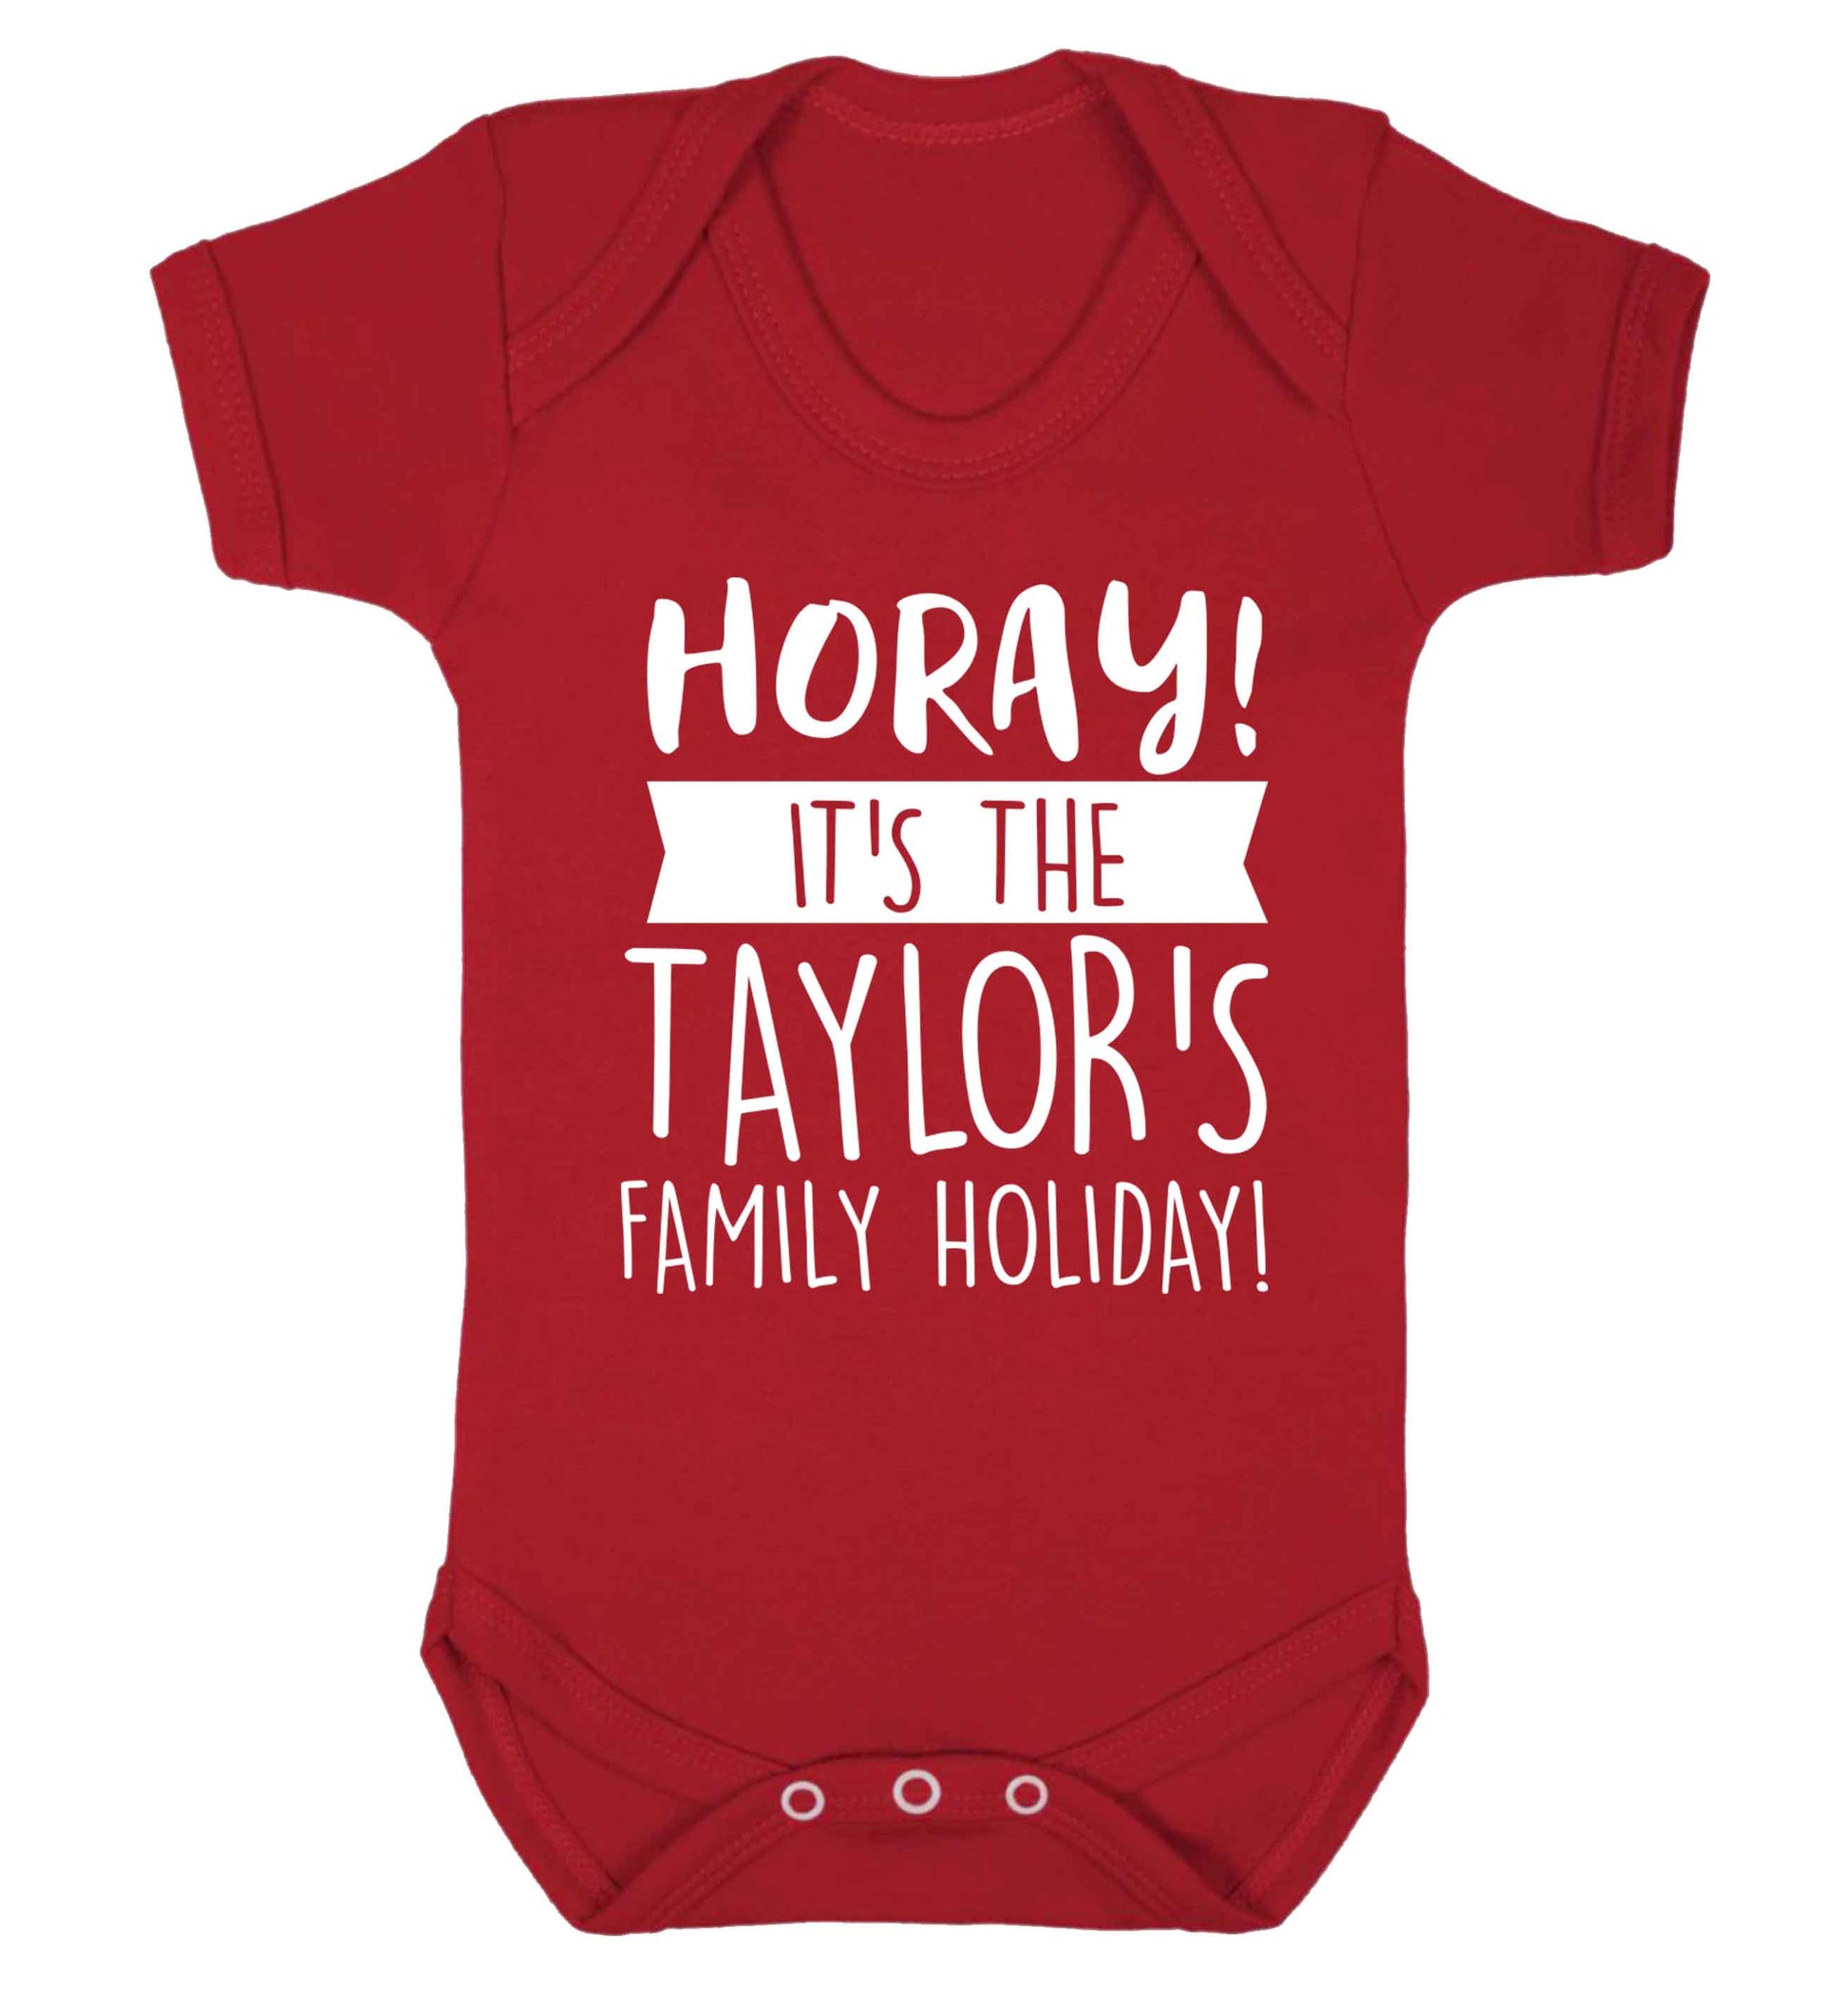 Horay it's the Taylor's family holiday! personalised item Baby Vest red 18-24 months